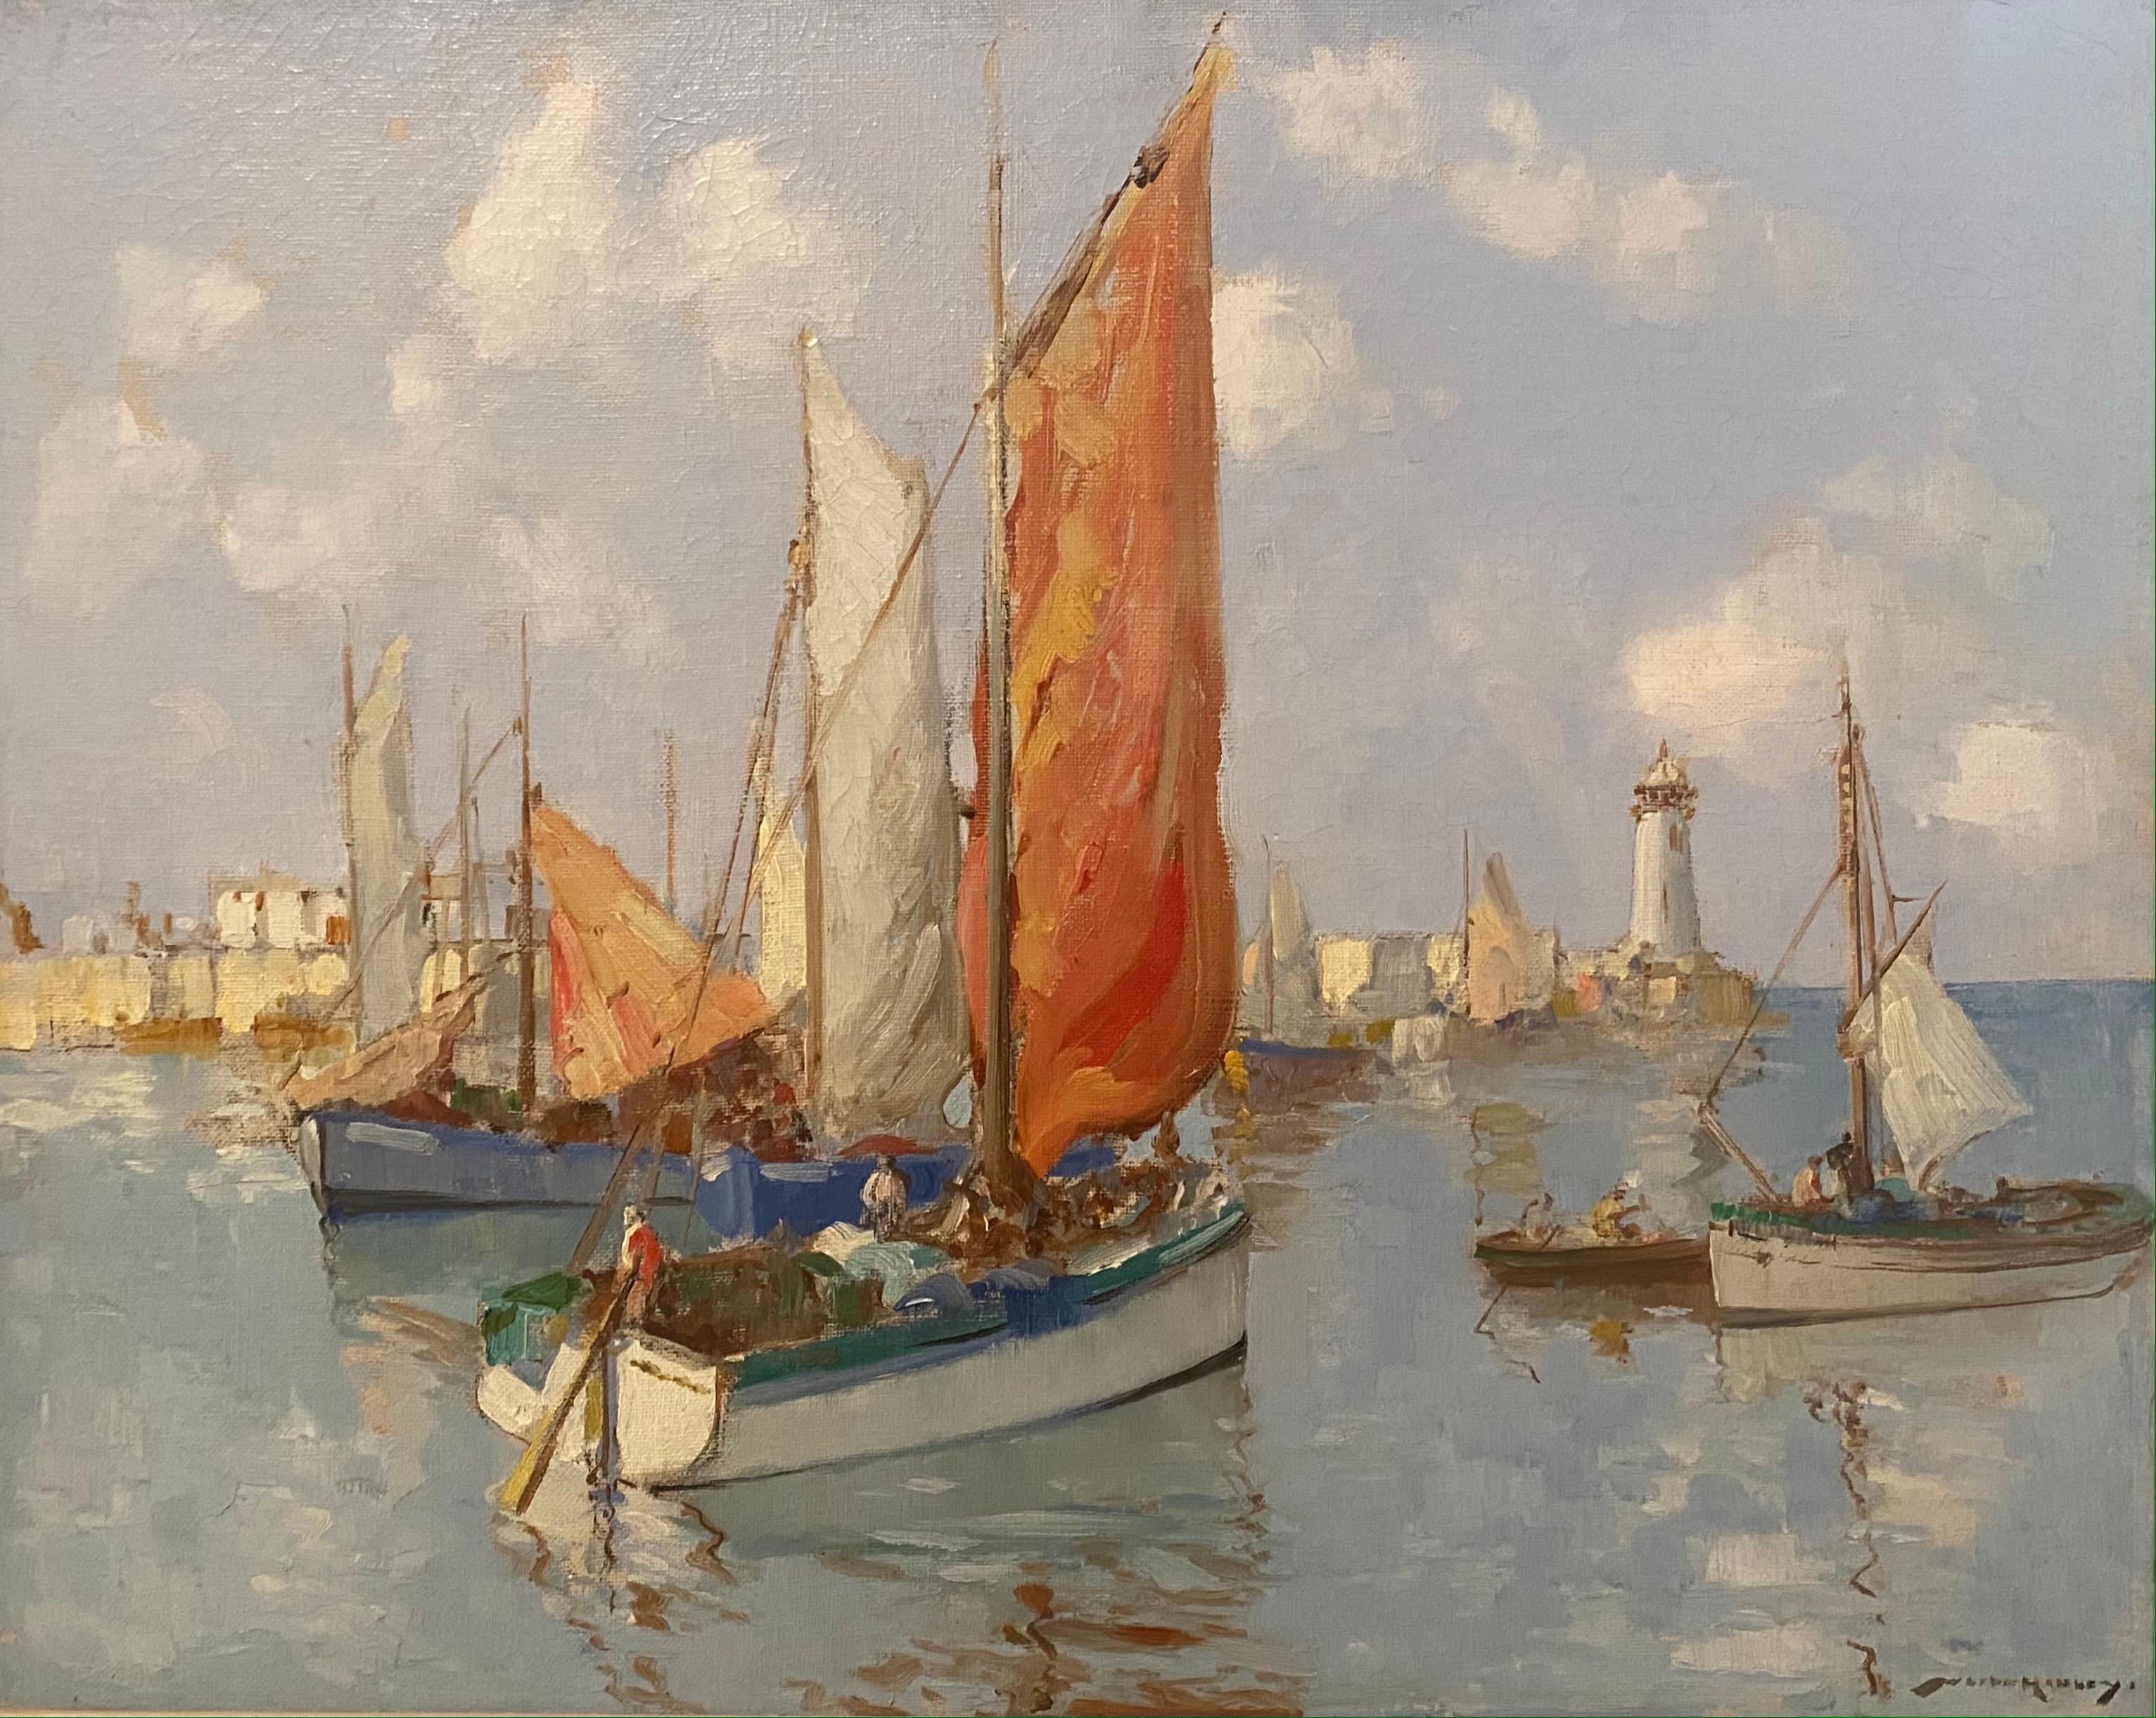 'Boats in the Harbour' Colourful 20th Century Figurative Painting of Fishing Boats in a harbour. Blues, reds and oranges. 

William Lee Hankey was born in Chester. Married to Mabel Lee Hankey and then Edith Garner. Studied at Chester School of Art